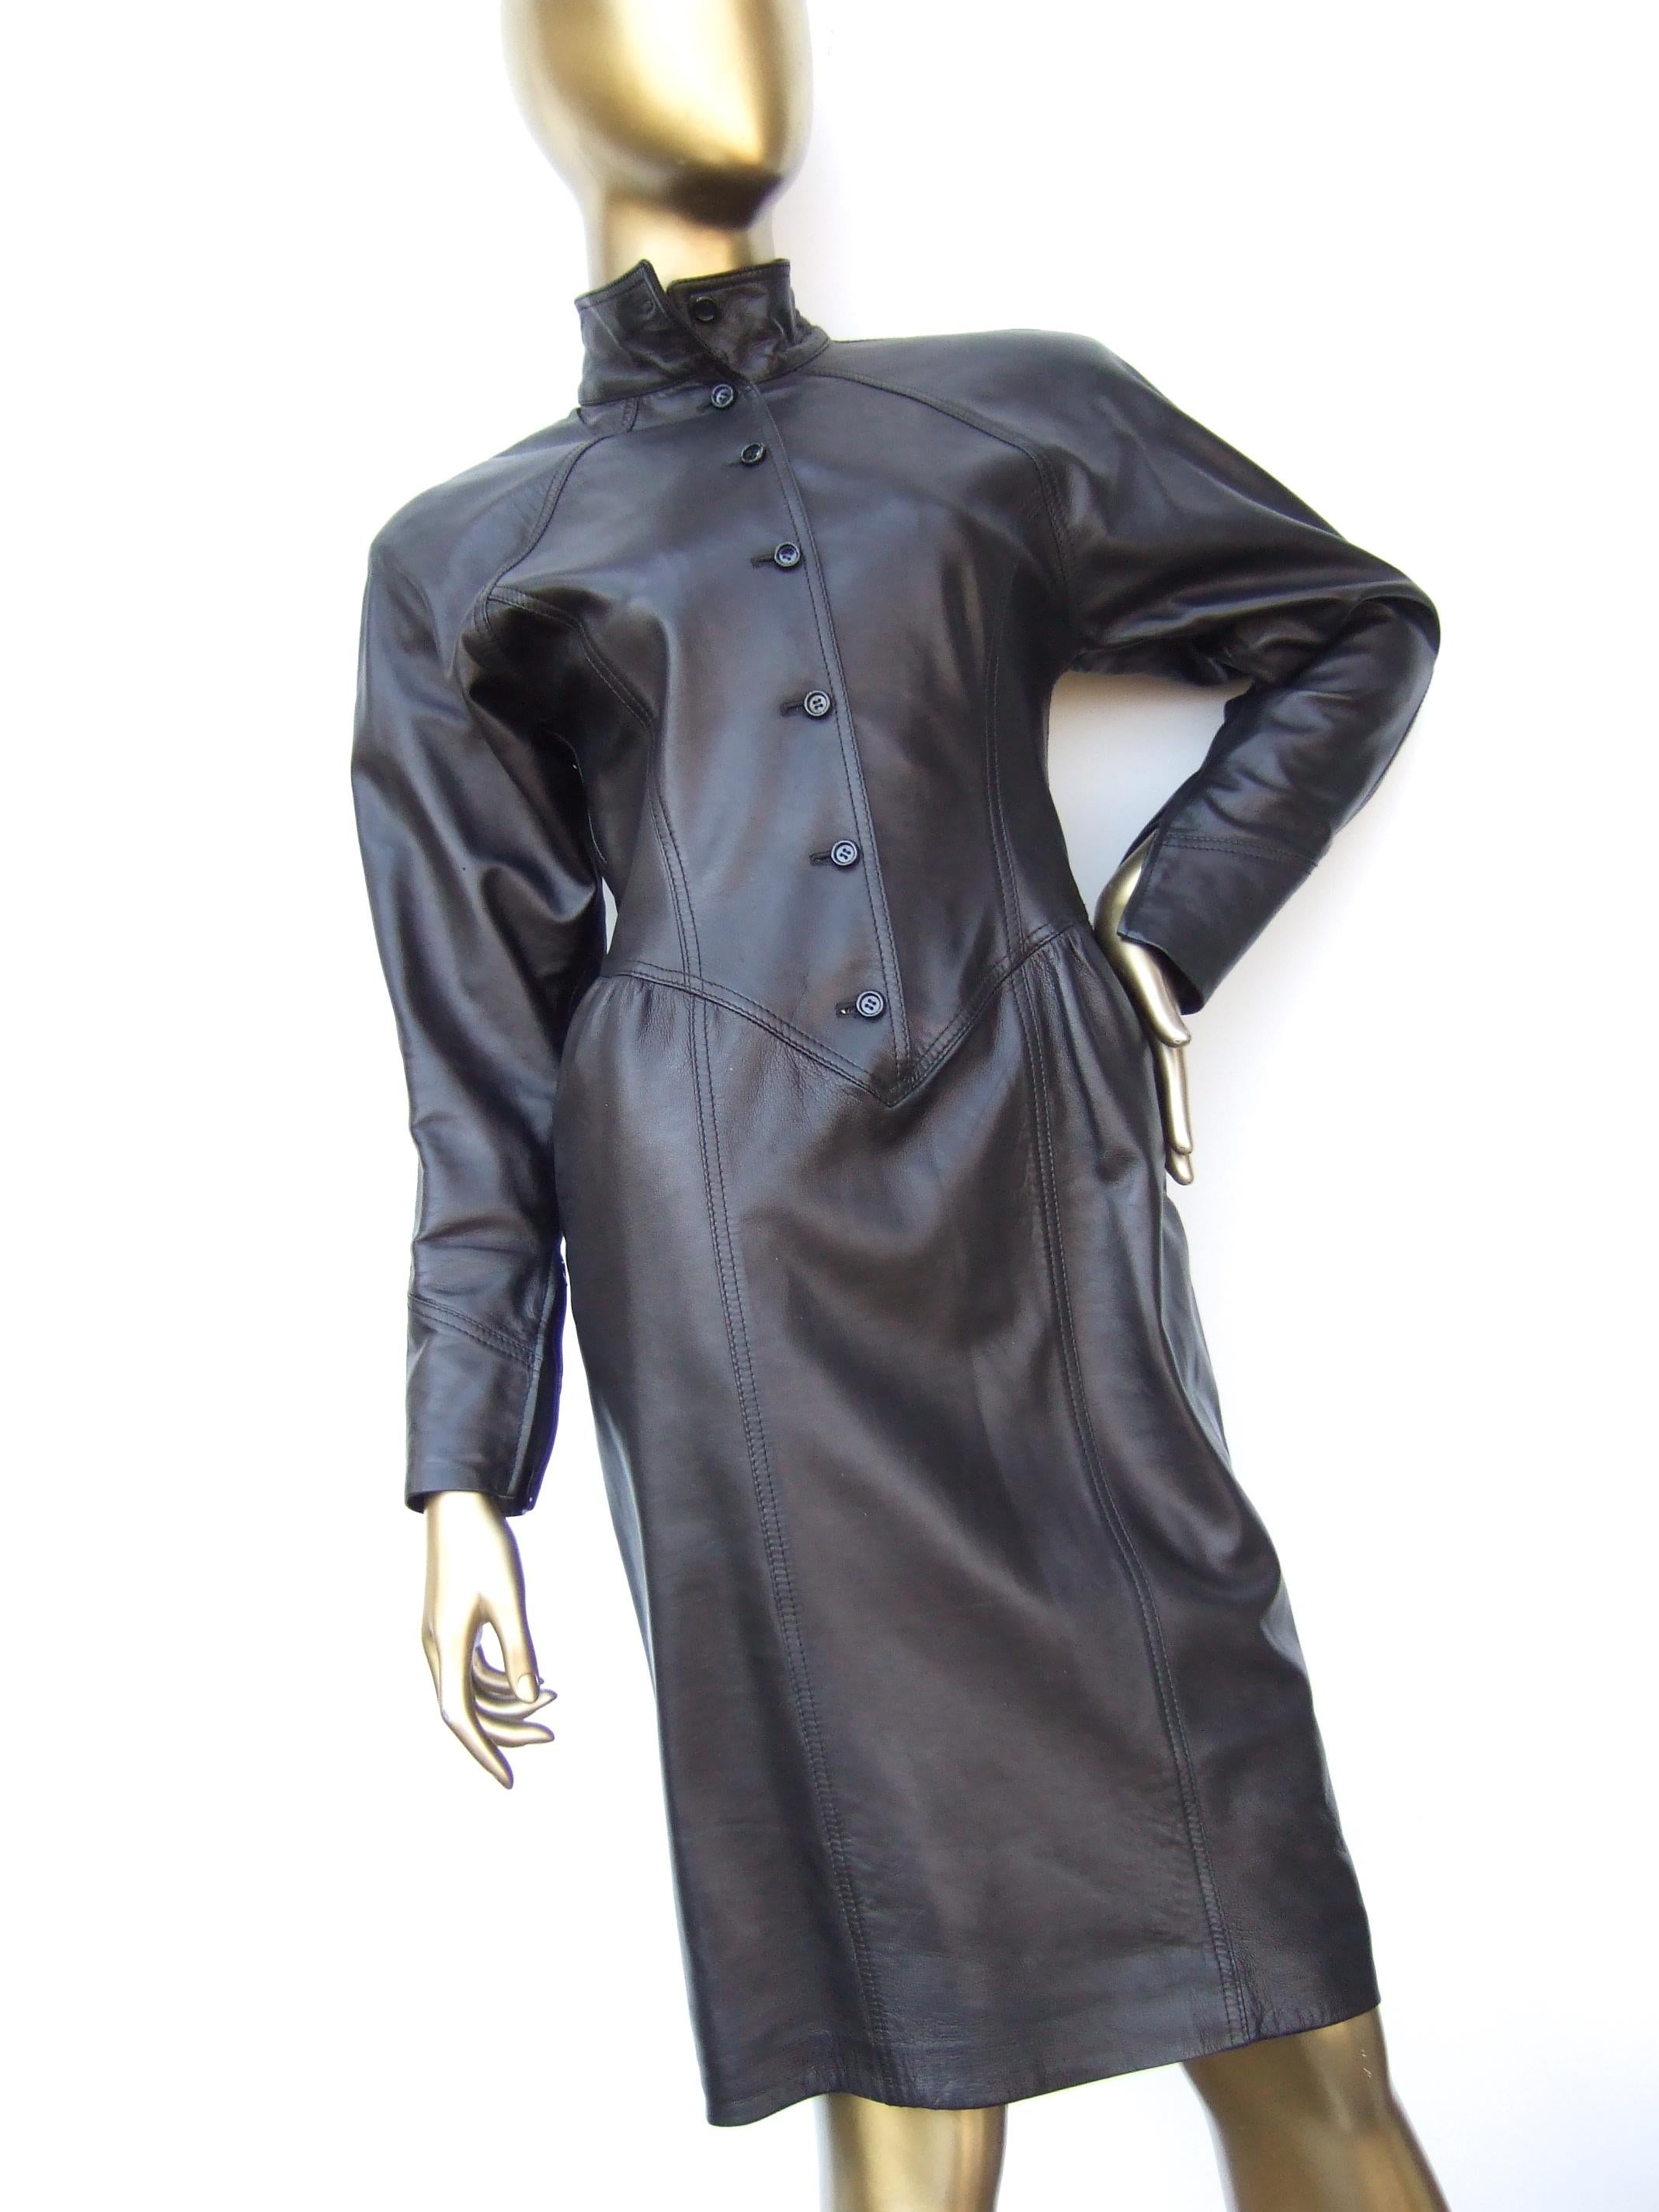 Emanuel Ungaro Paris Avant-garde Edgy Brown Leather Dress Made in Italy c 1980s For Sale 1